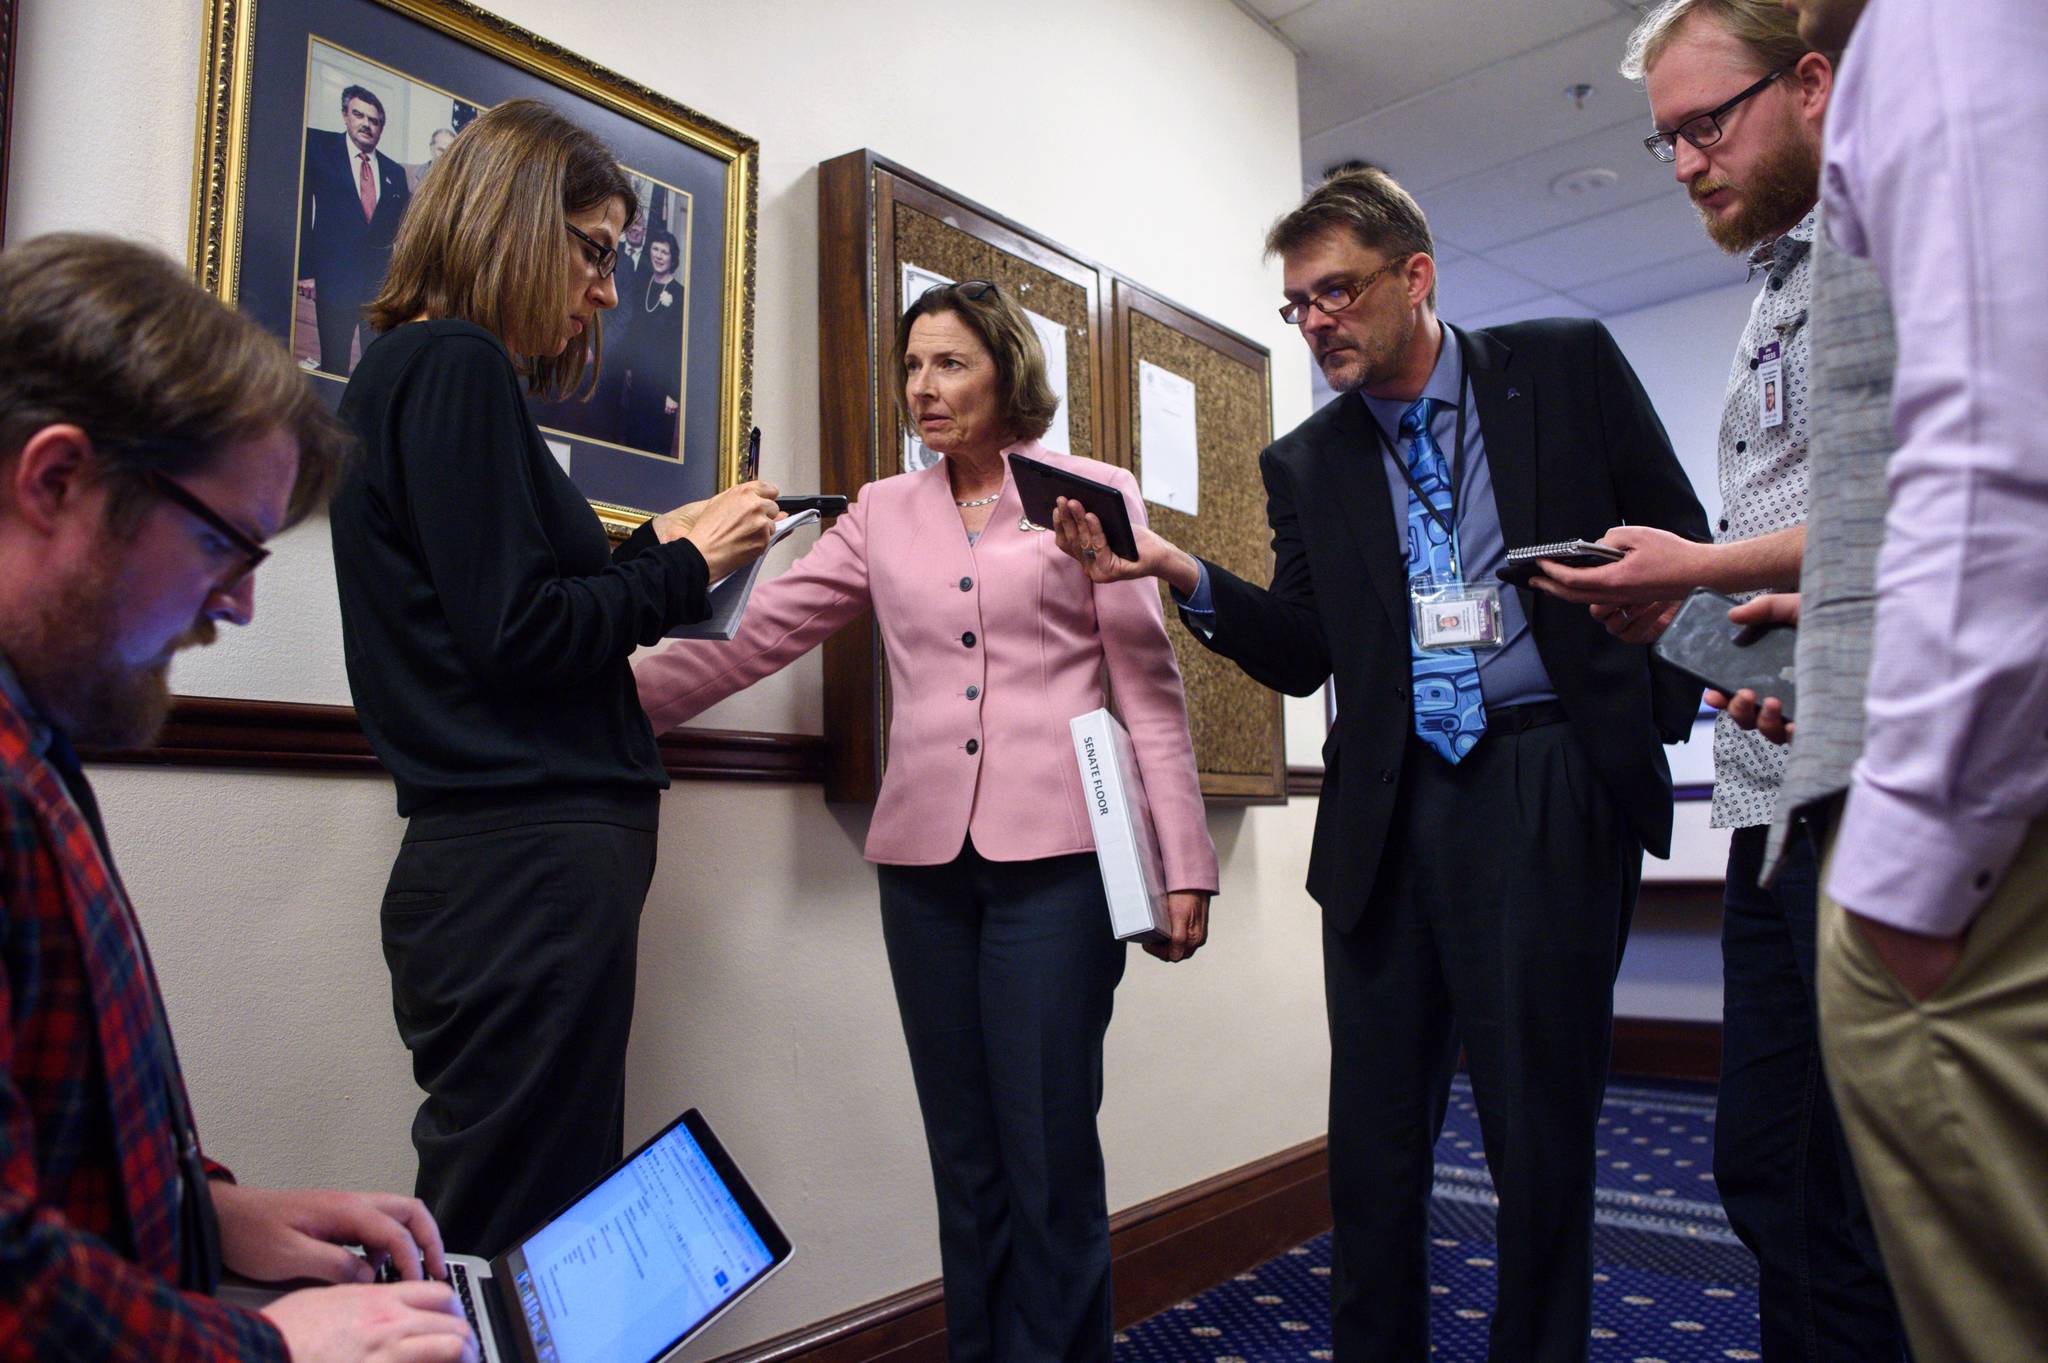 Senate President Cathy Giessel, R-Anchorage, center, is interviewed by members of the media after a “call” on the Senate was lifted on Thursday, June 6, 2019 (Michael Penn | Juneau Empire)